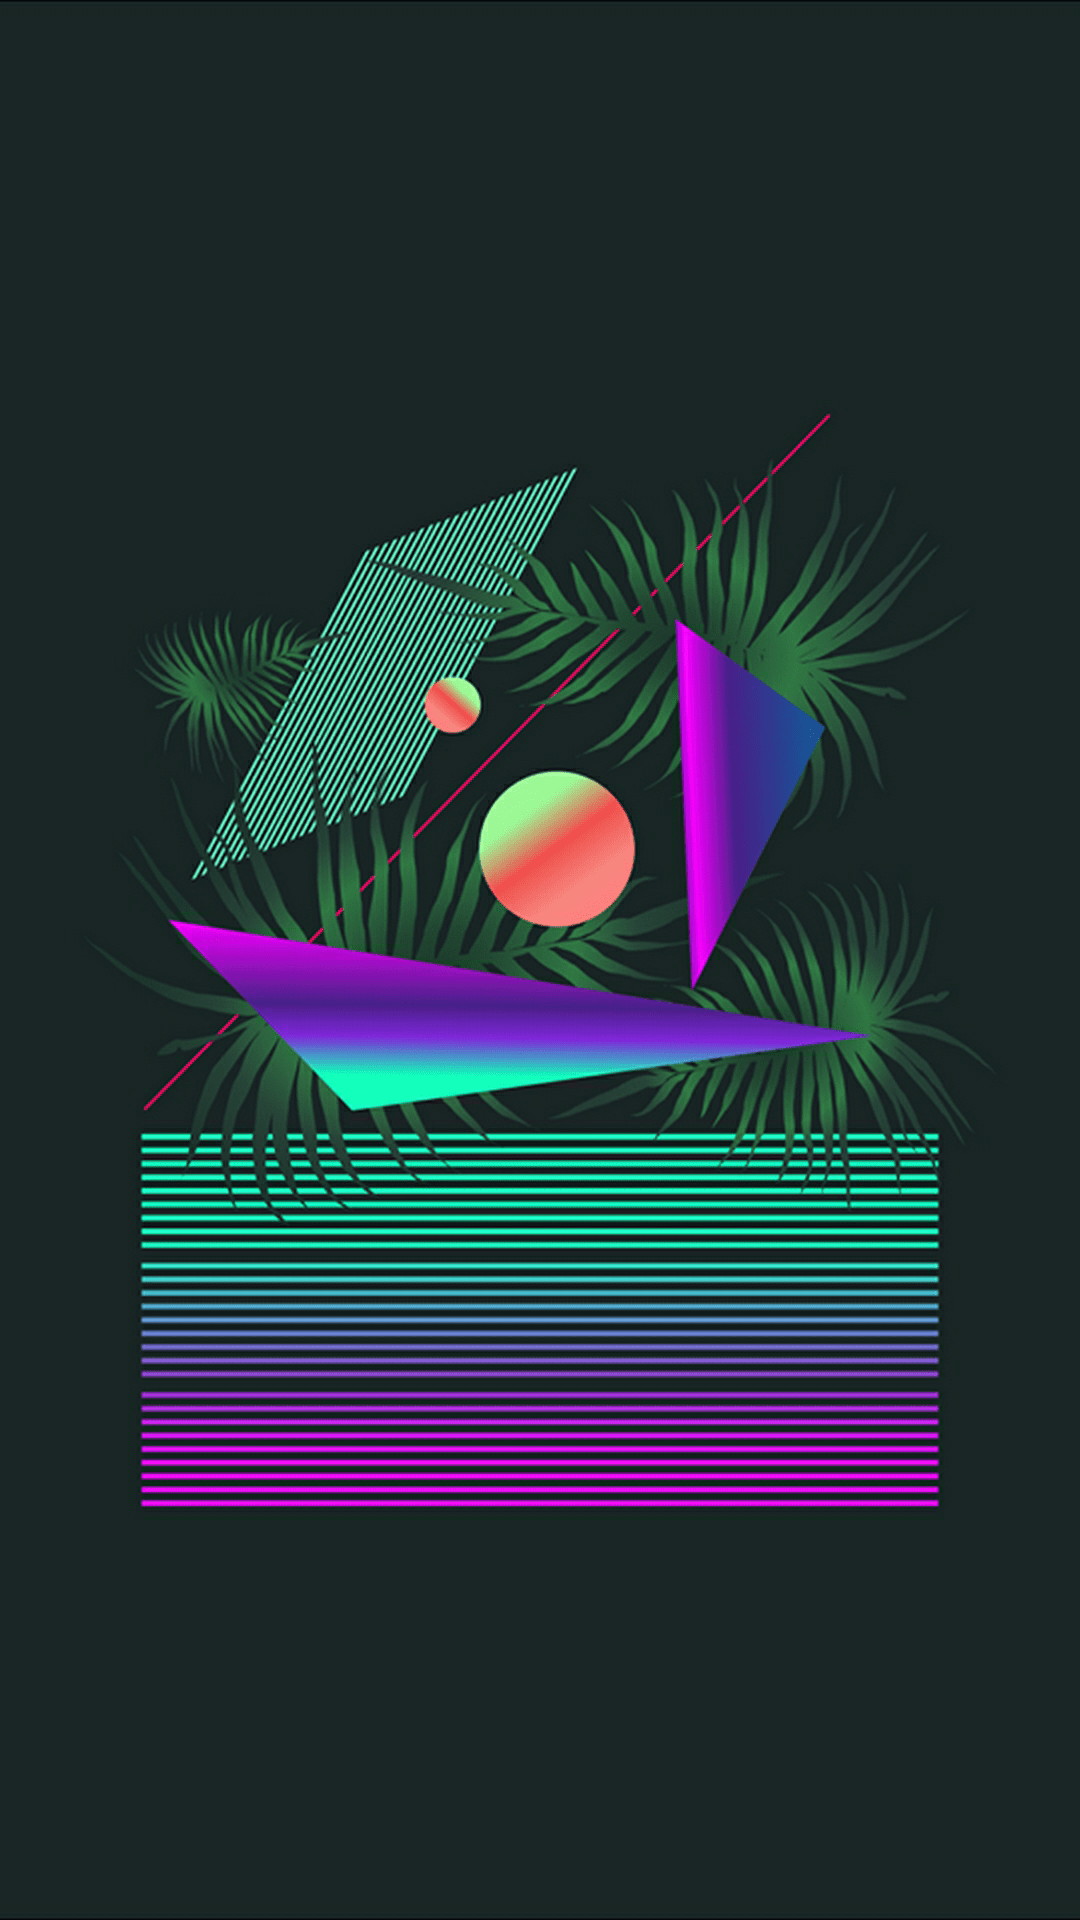 A colorful abstract design with palm leaves - Vaporwave, illustration